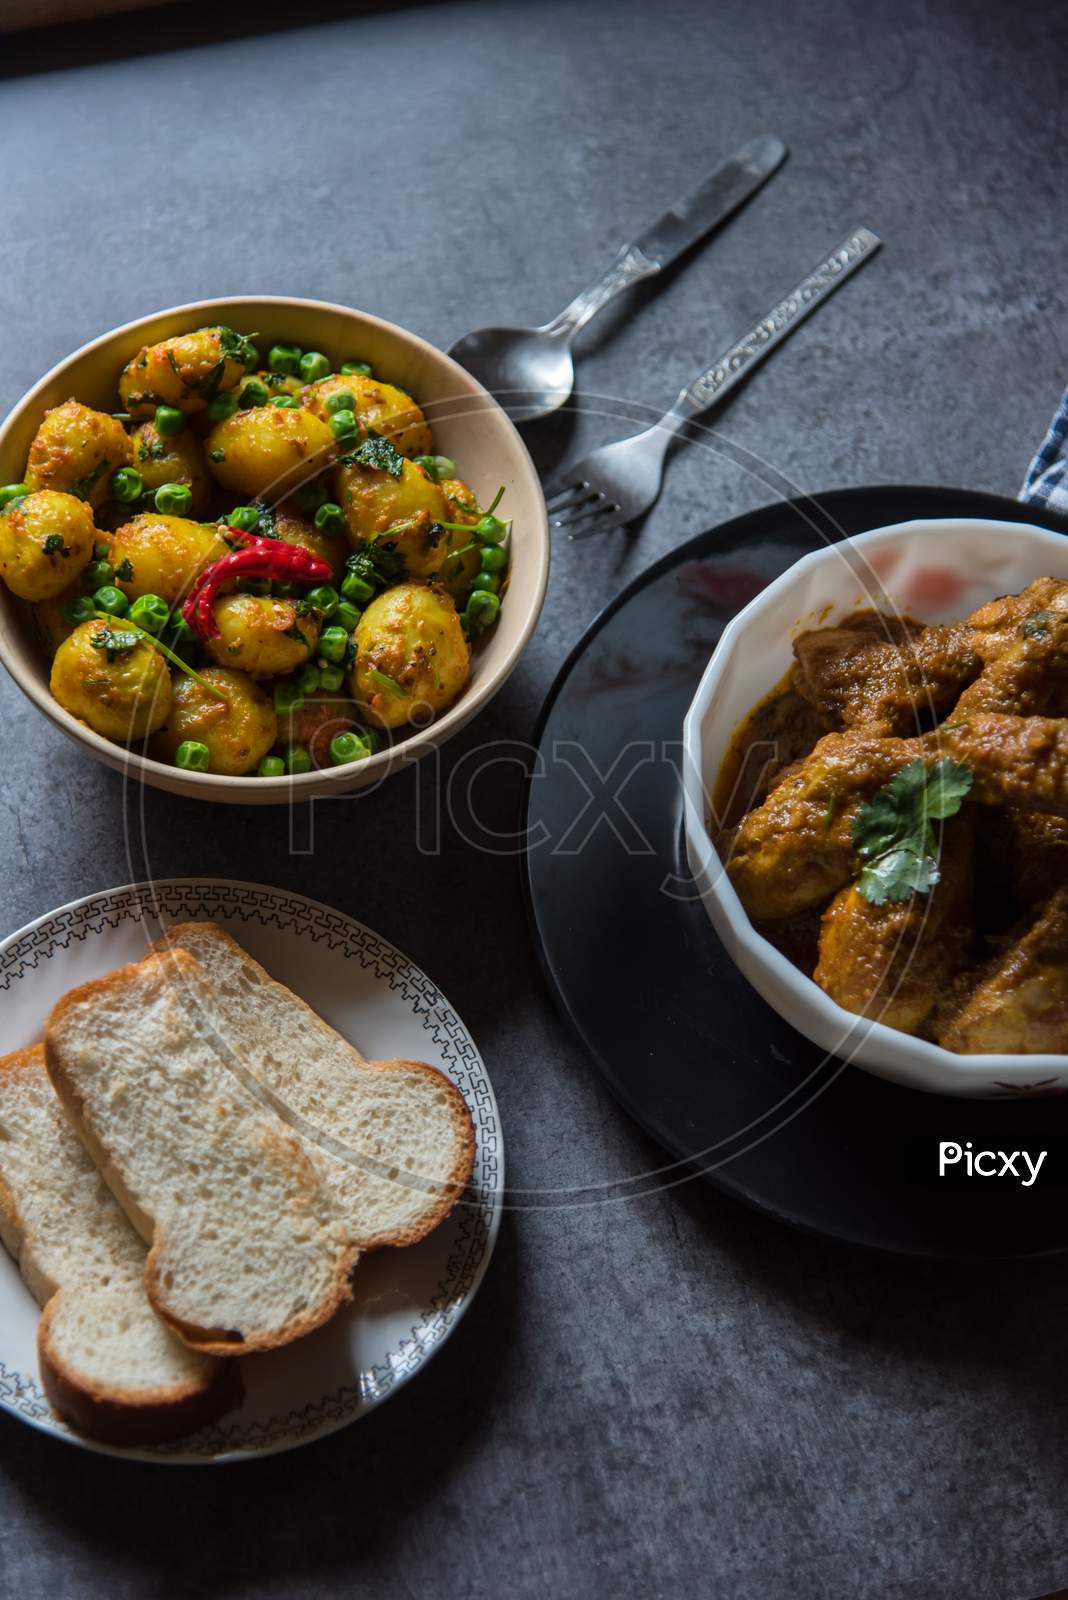 Spicy food ingredients chicken in gravy and dum aloo or masala potatoes cooked in Indian style.